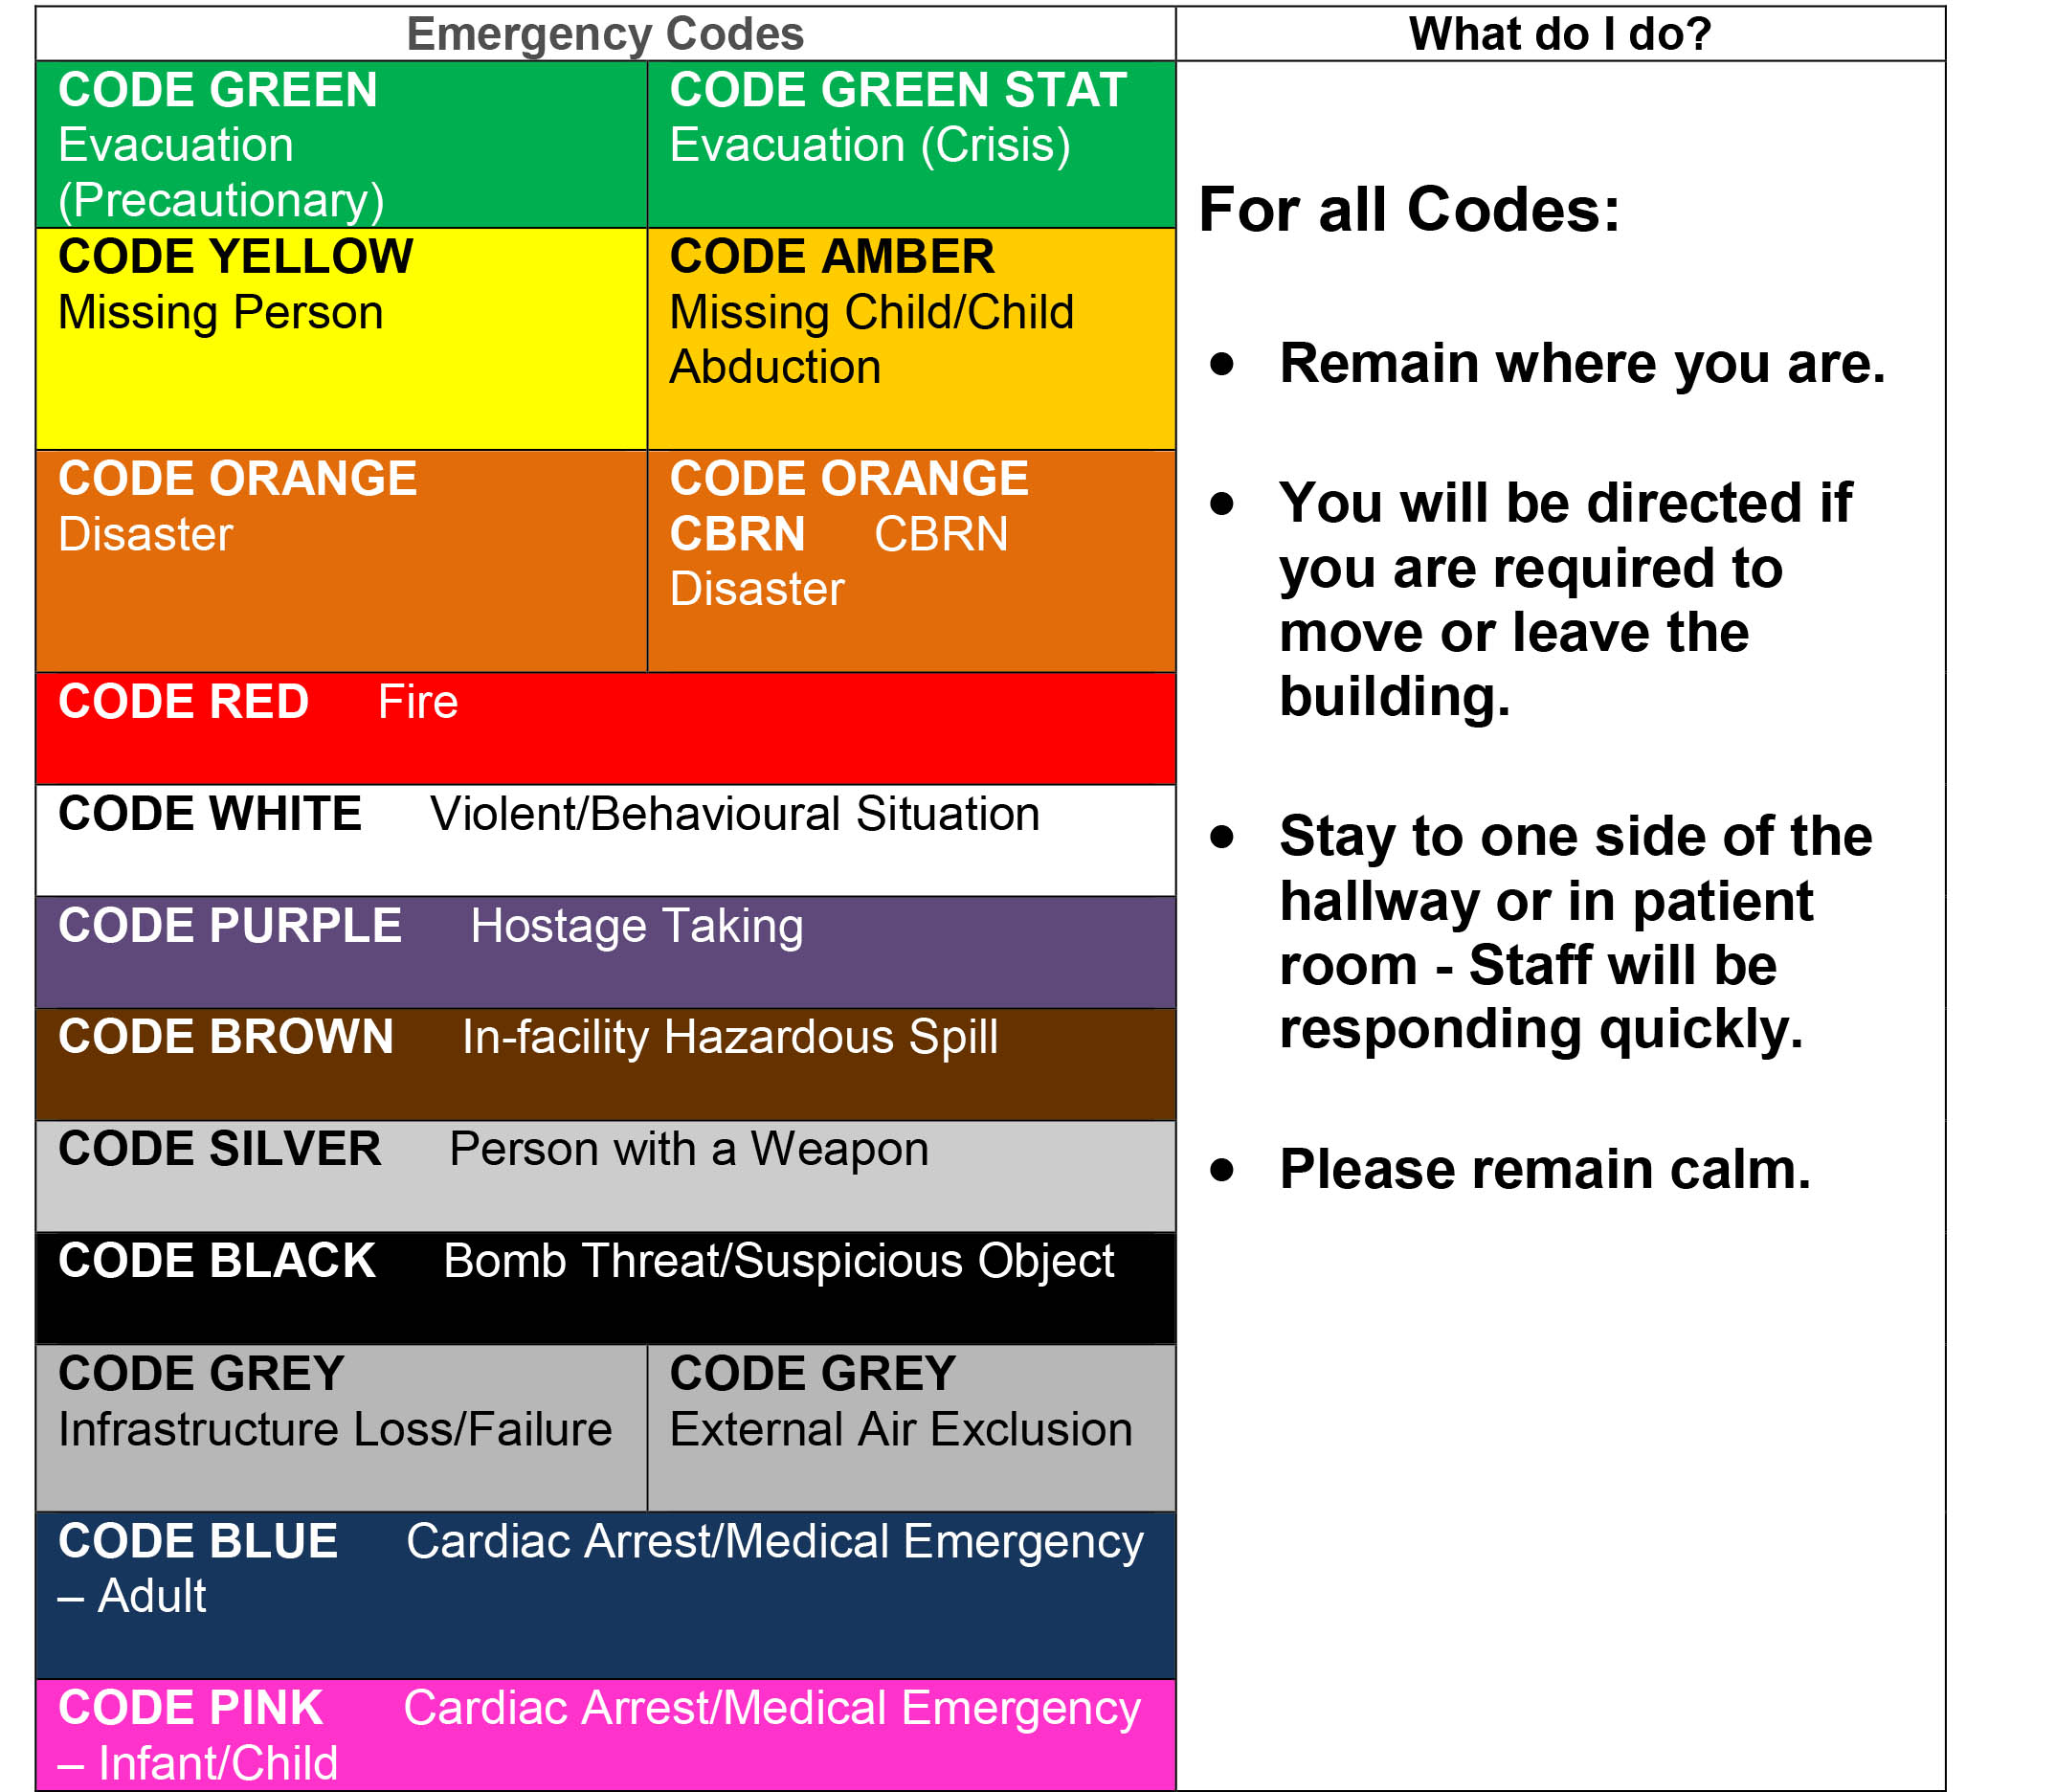 Emergency Codes table